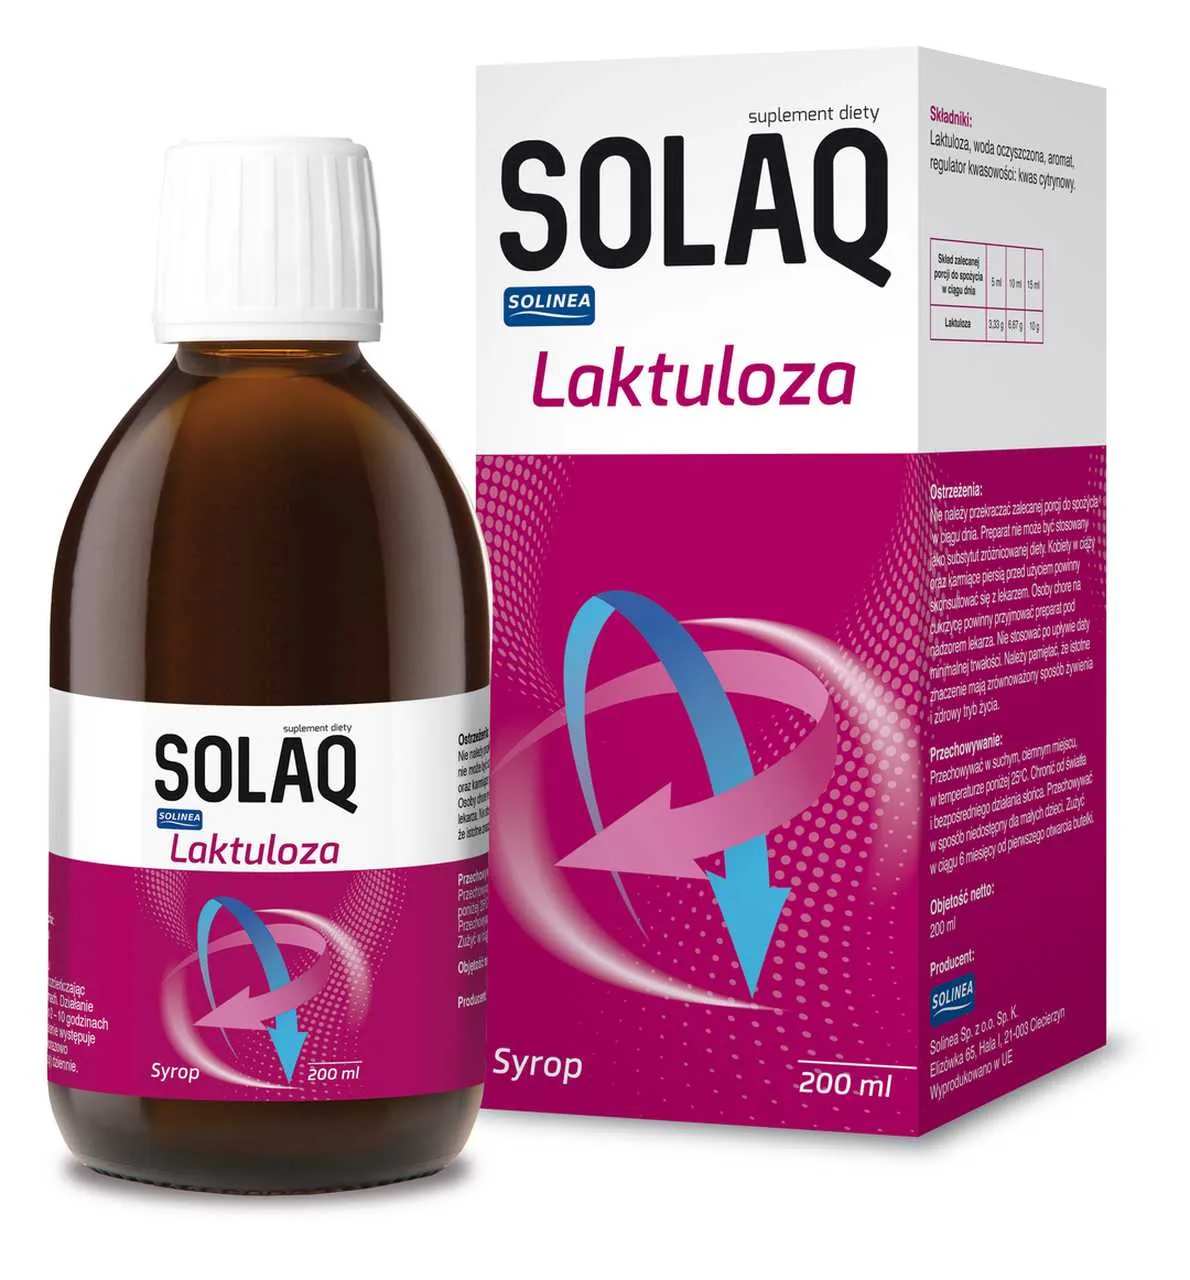 Solaq Solinea, suplement diety, syrop, 200 ml